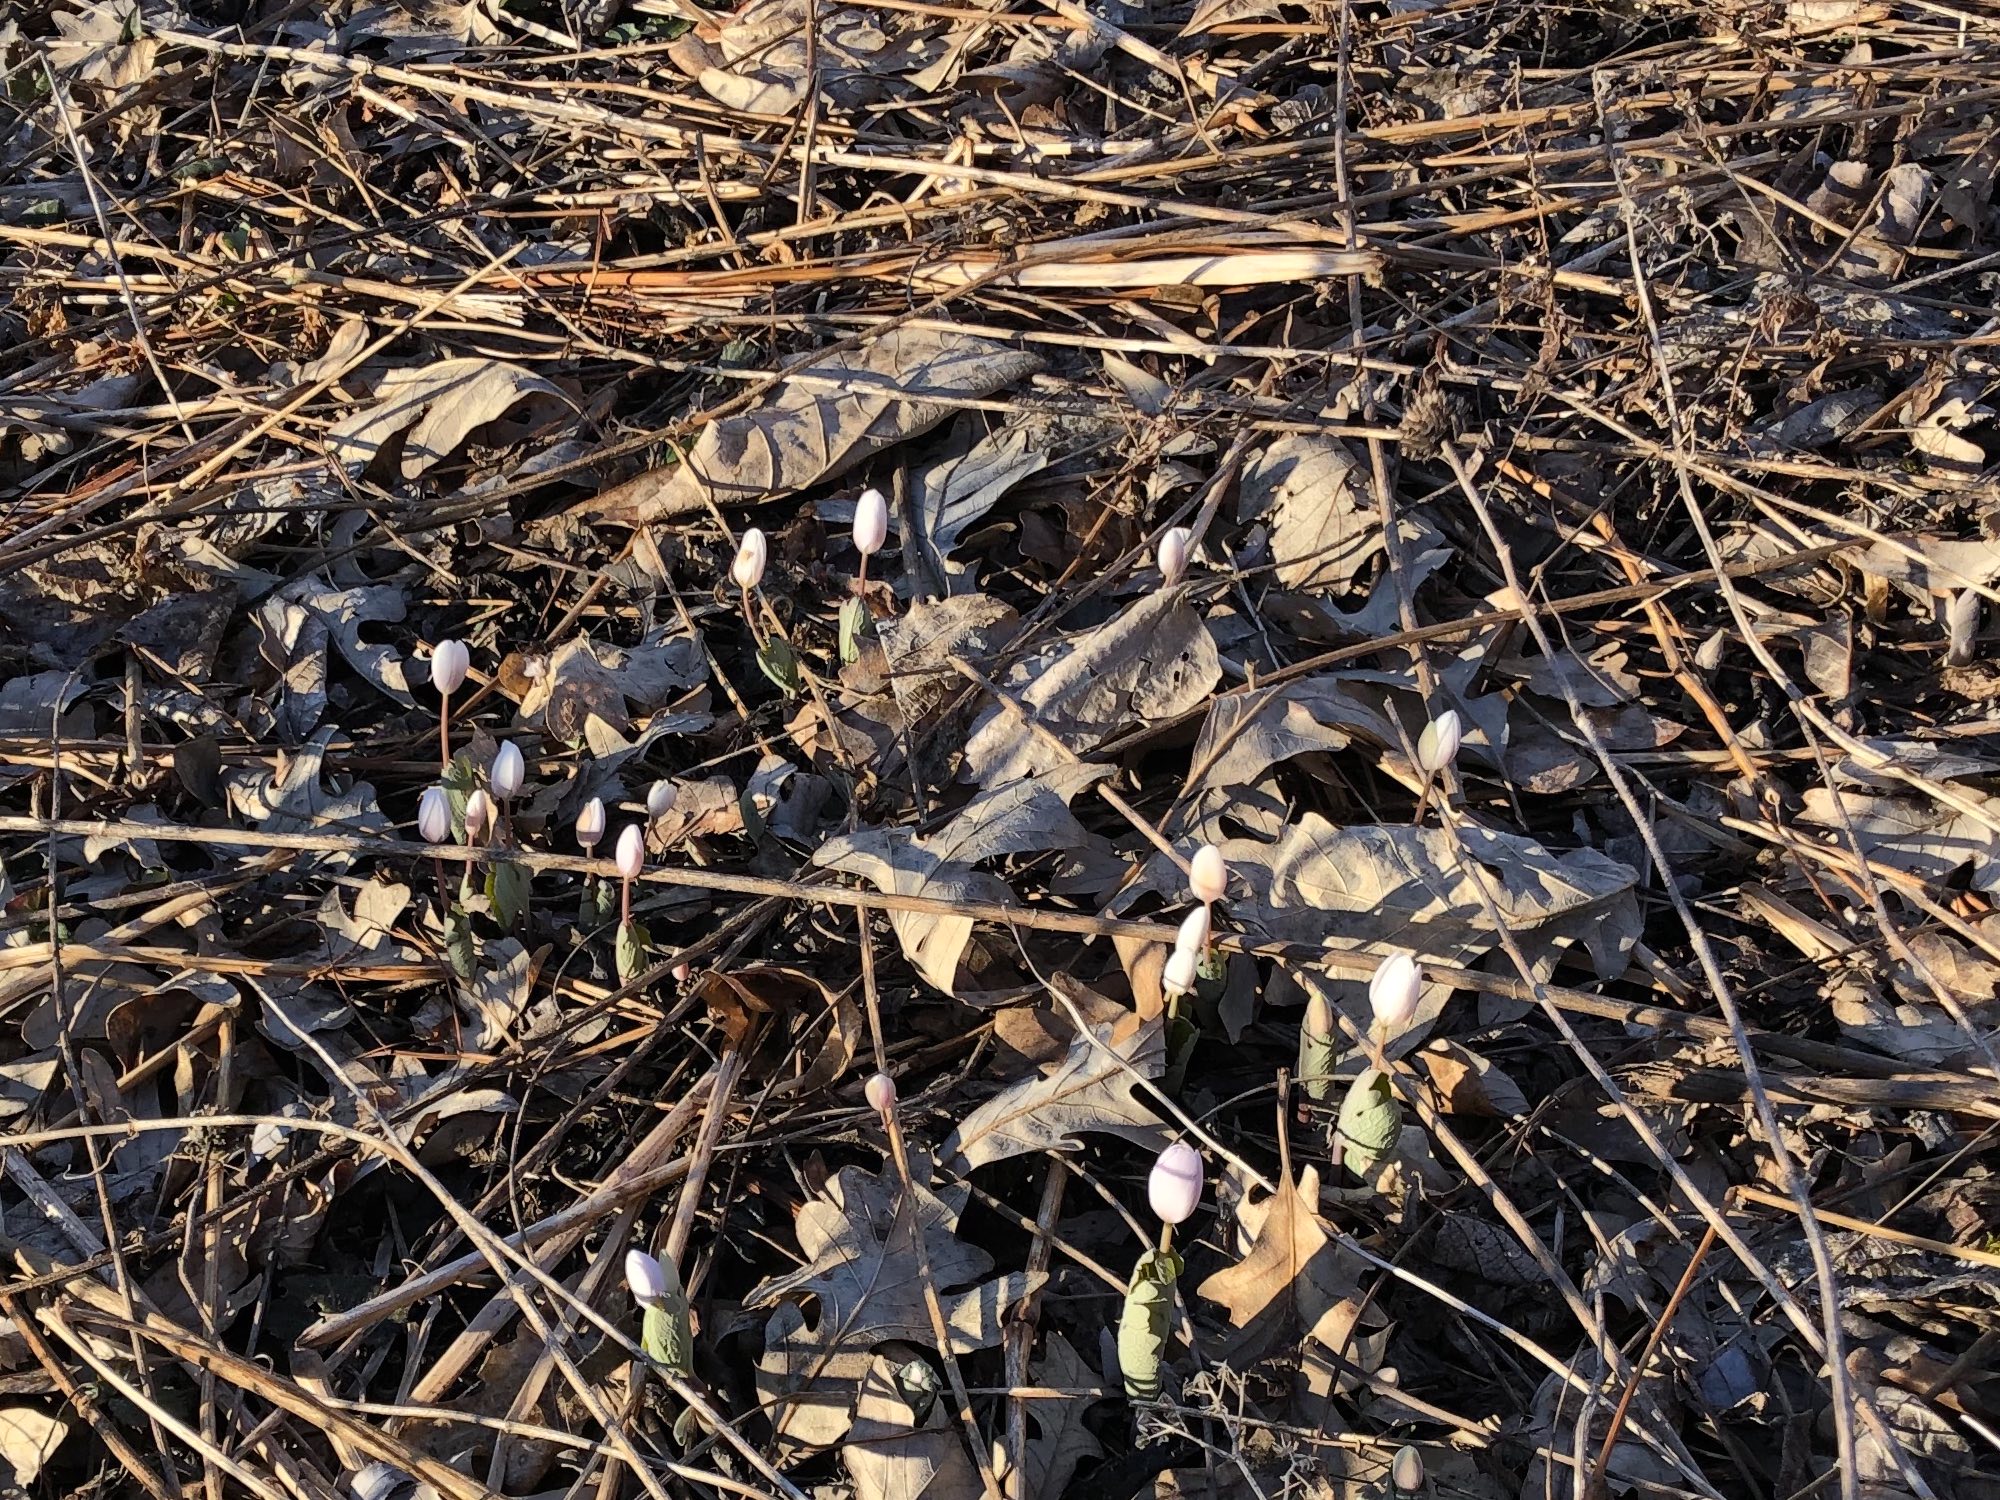 Bloodroot near Council Ring on April 3, 2019.